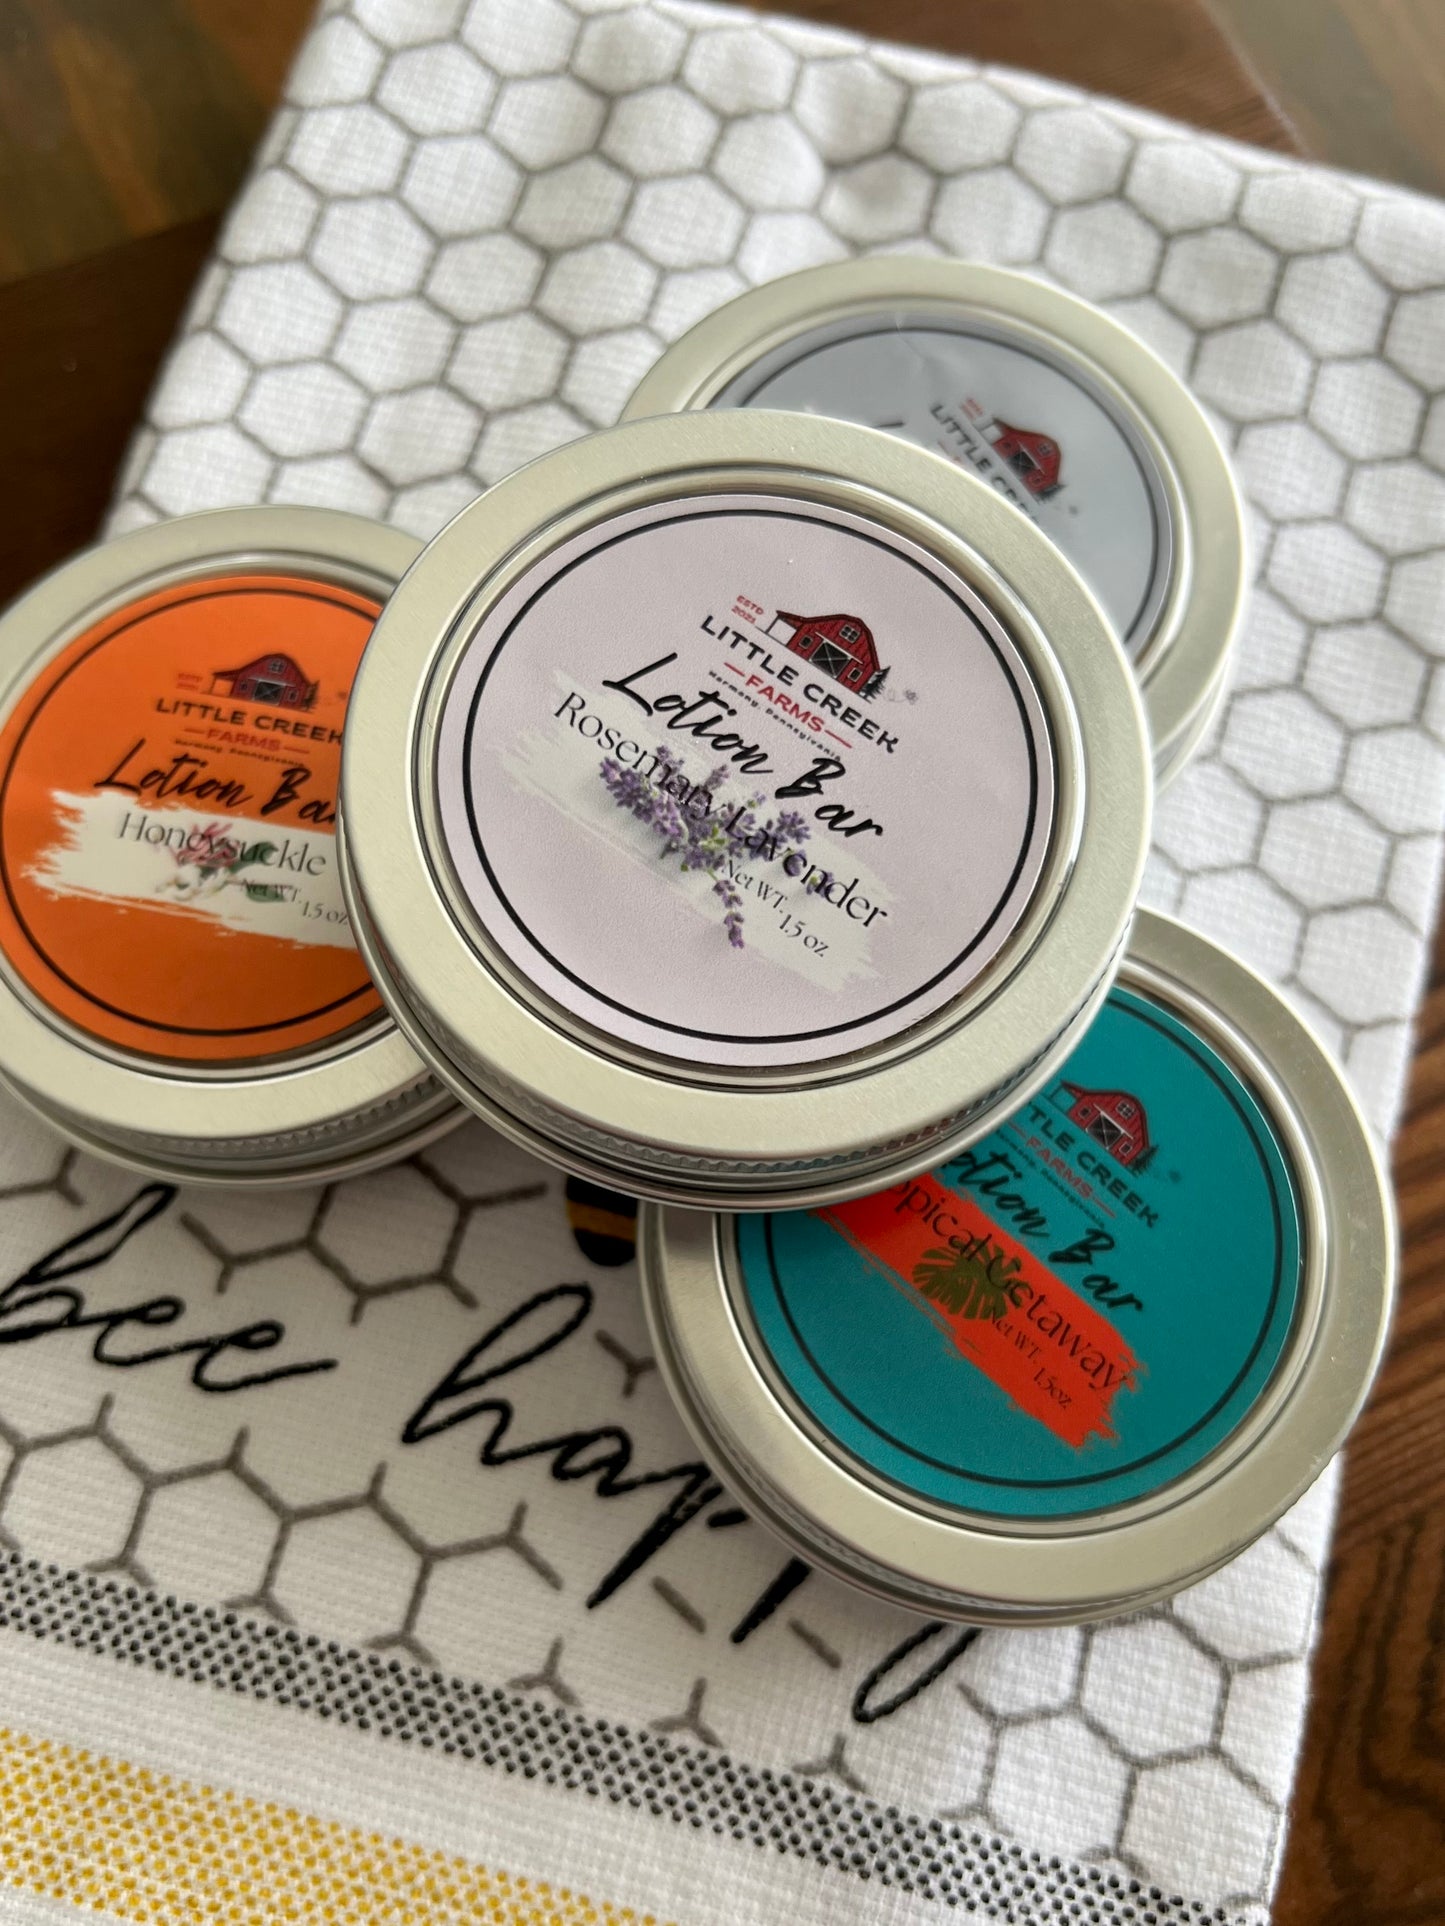 Solid Lotion Bars - 1.5 oz - Choose Your Scent